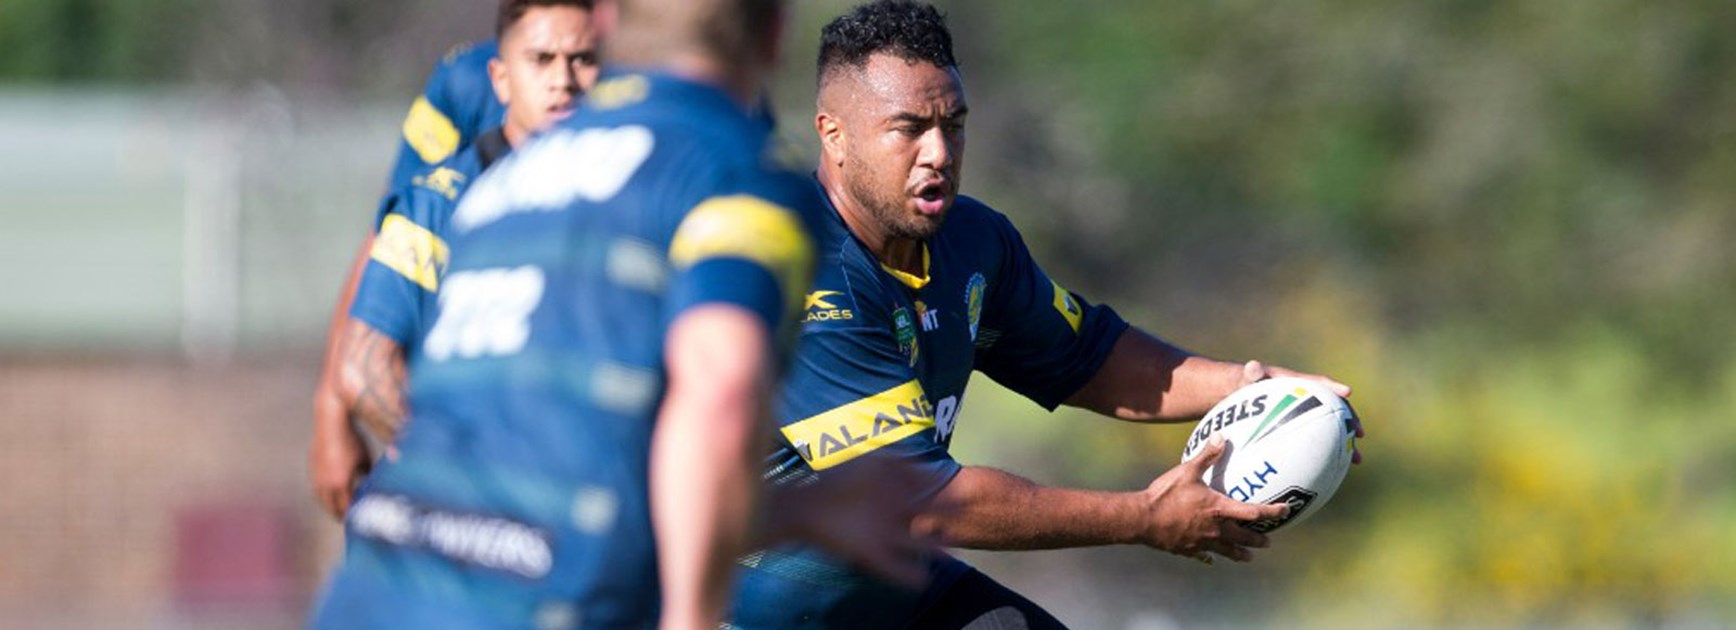 Siosaia Vave is set to make his Eels debut in Round 4.